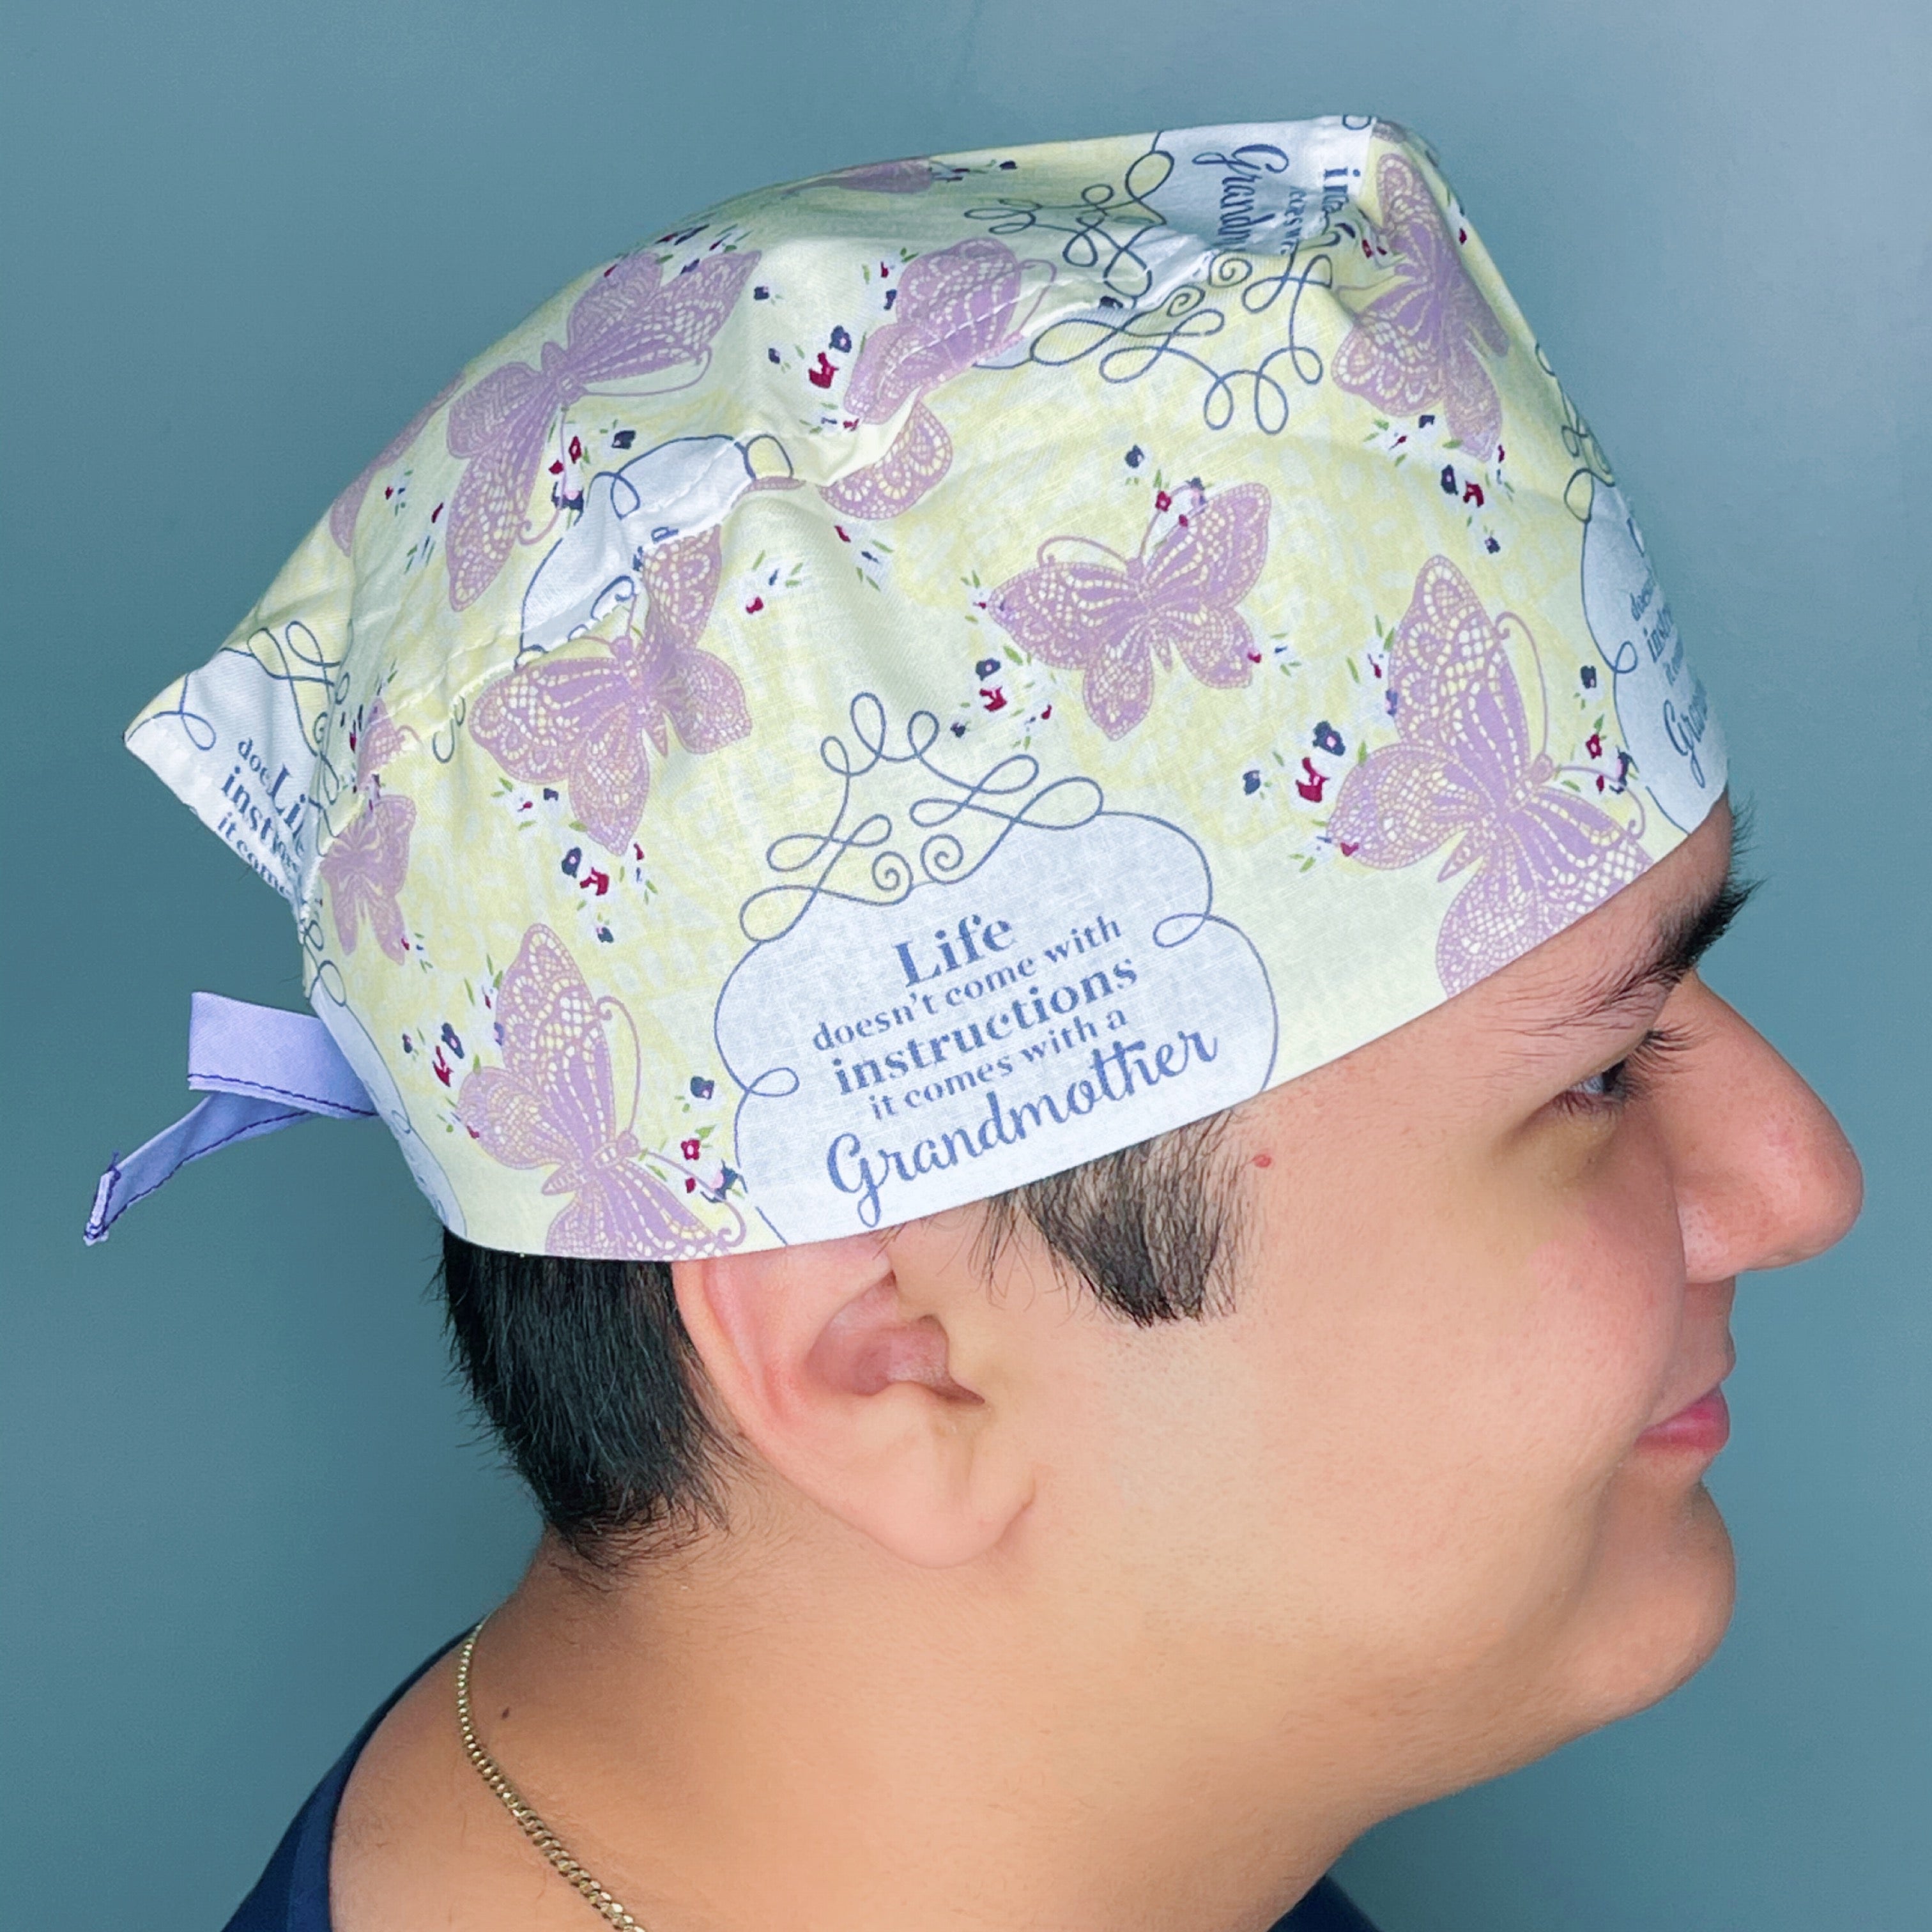 Life Doesn't Come with Instructions it Comes with a Grandmother Design Unisex Cute Scrub Cap